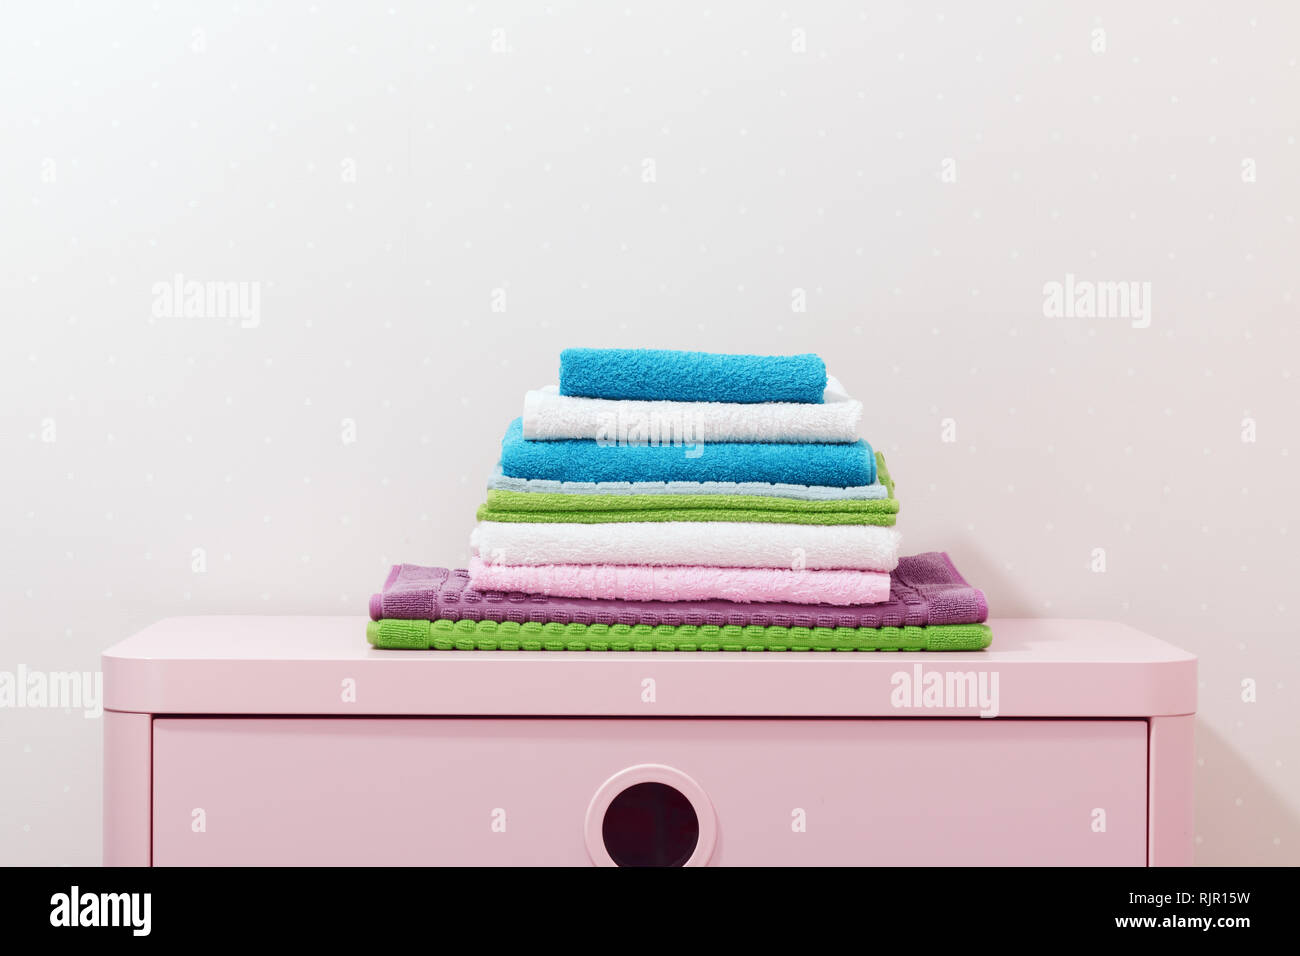 On the chest lies a stack of stacked colorful towels. Stock Photo